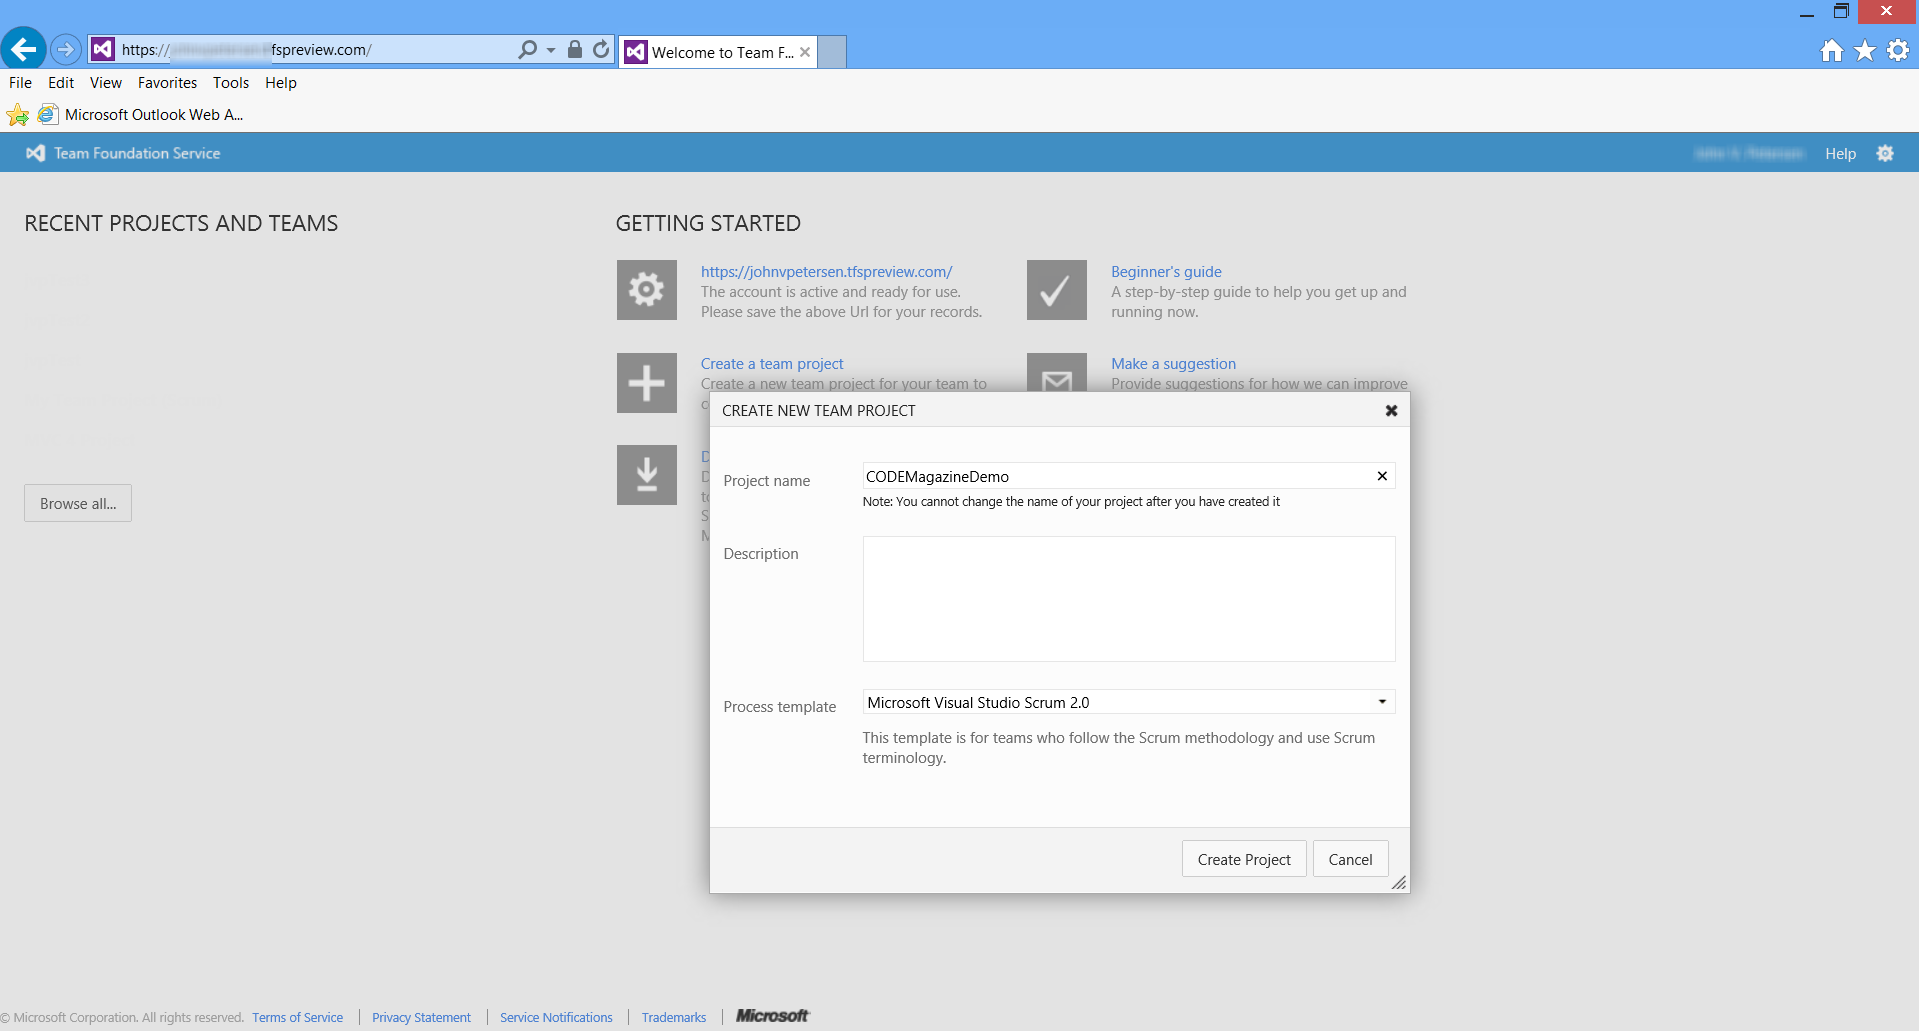 Figure 2: The Create New Team Project dialog box in the TFS 2012 Preview.